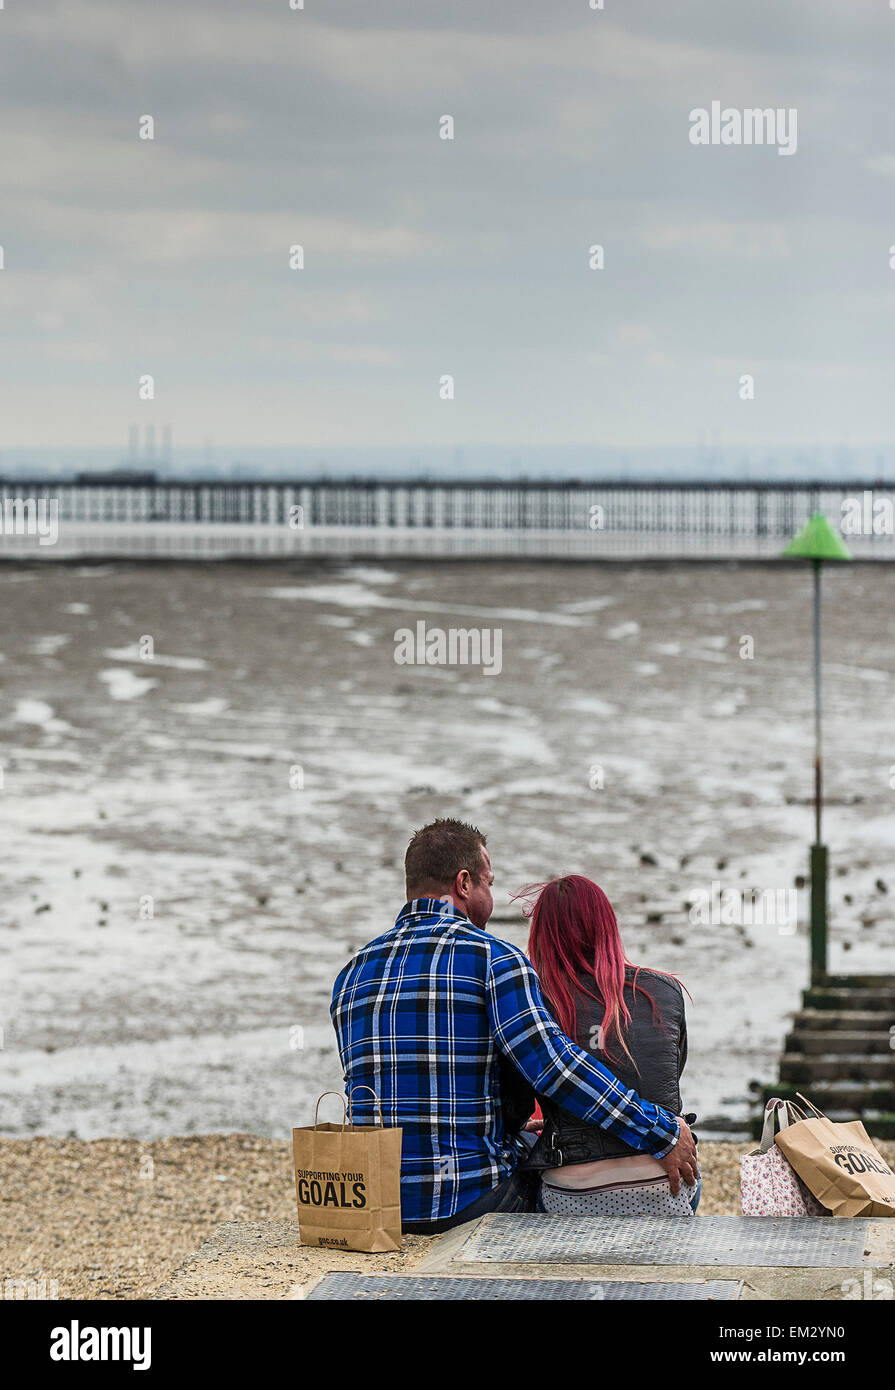 A couple relaxing on City Beach in Southend, Essex. Stock Photo